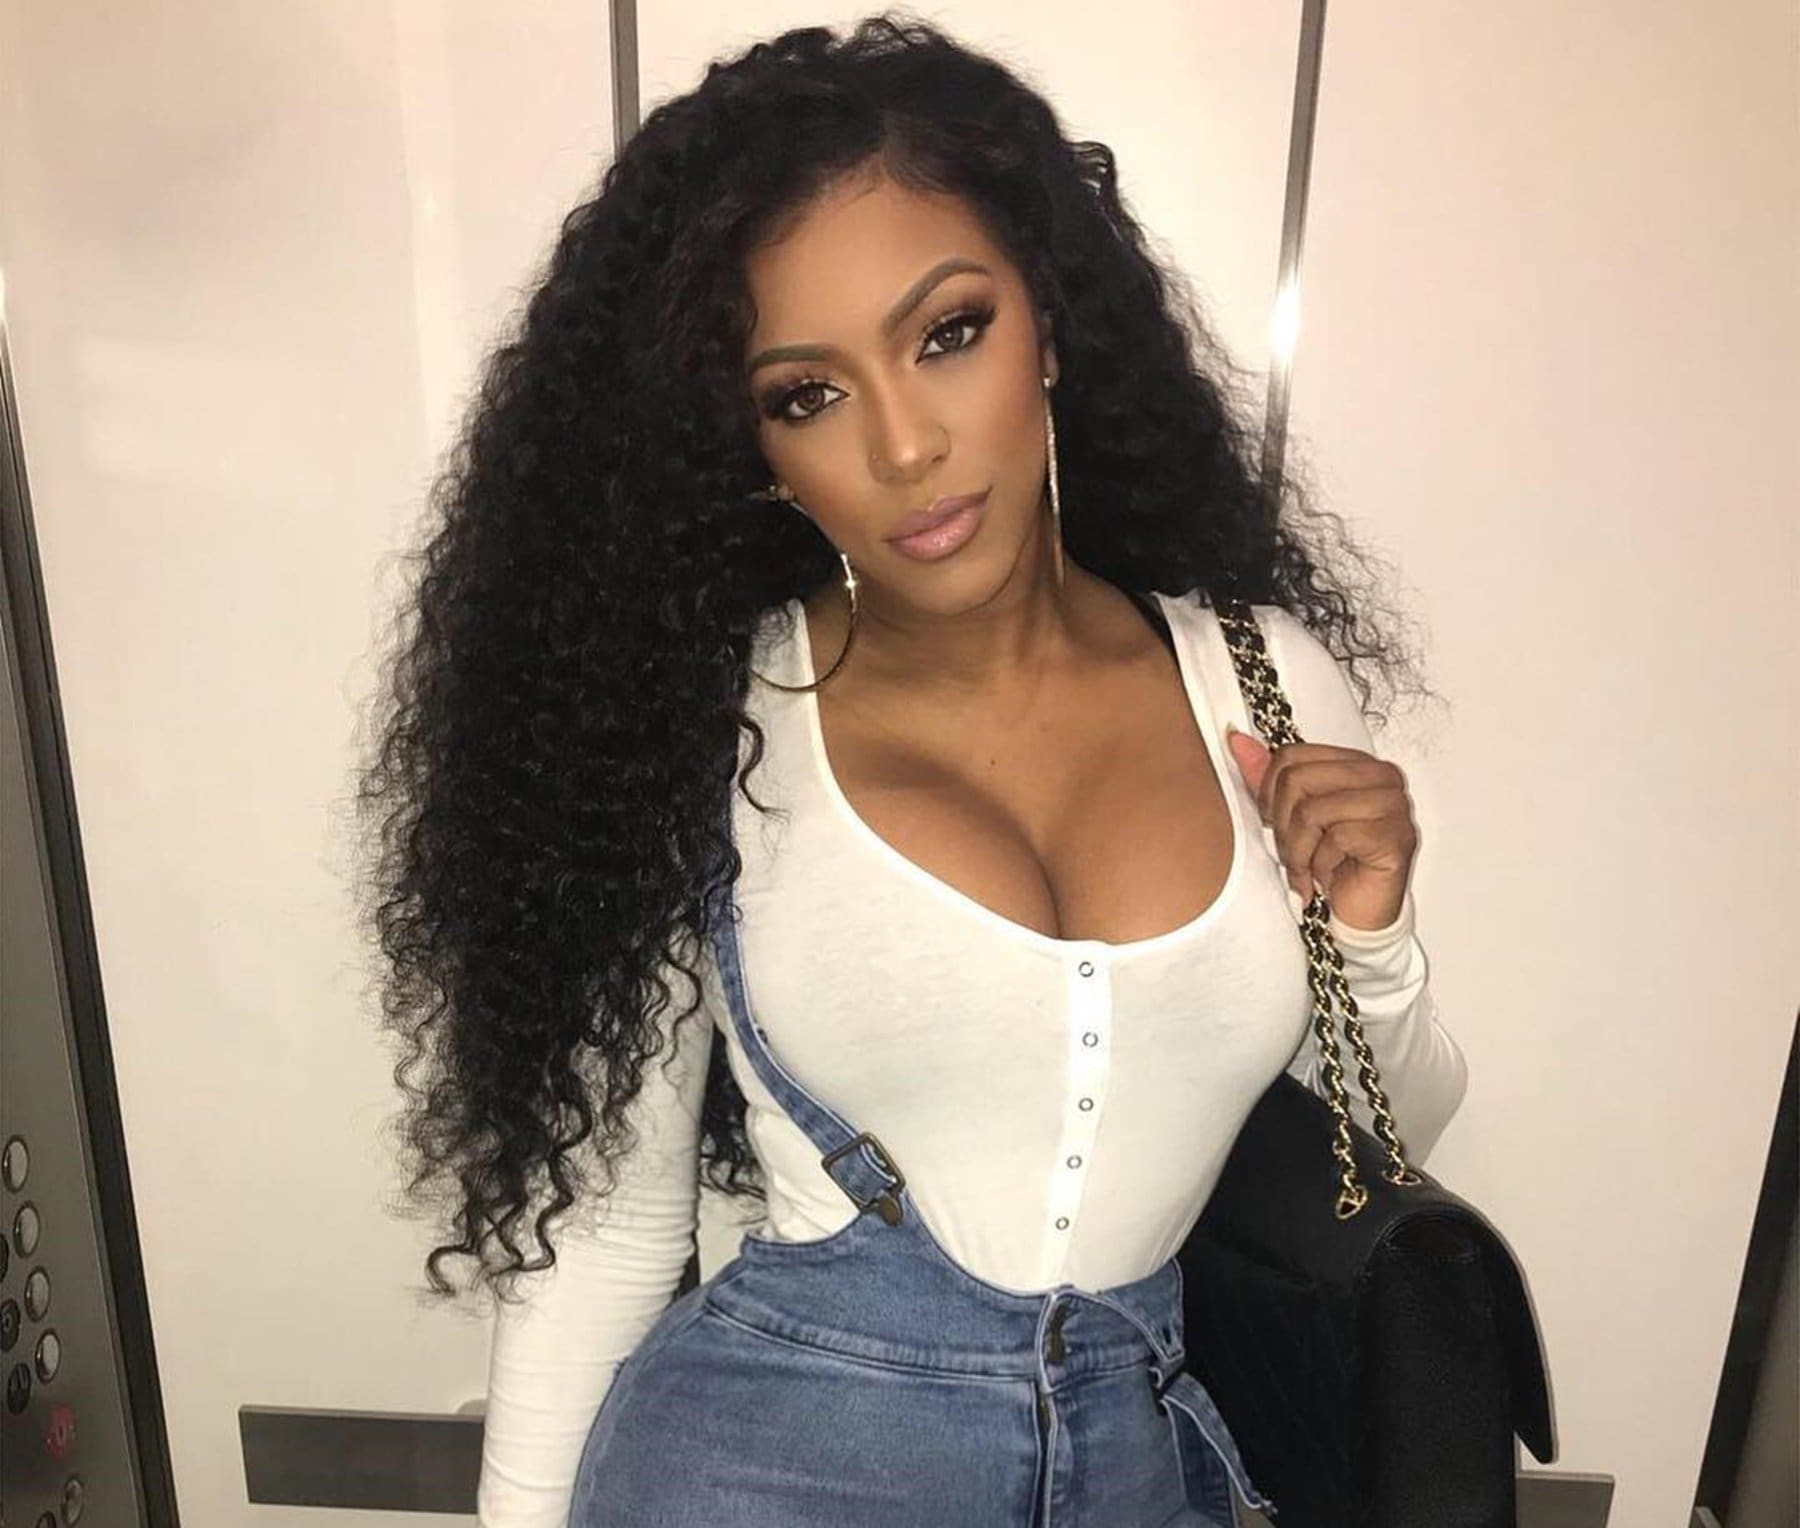 Porsha Williams Shows Off Her Hourglass Figure And Fans Shower Her With Love